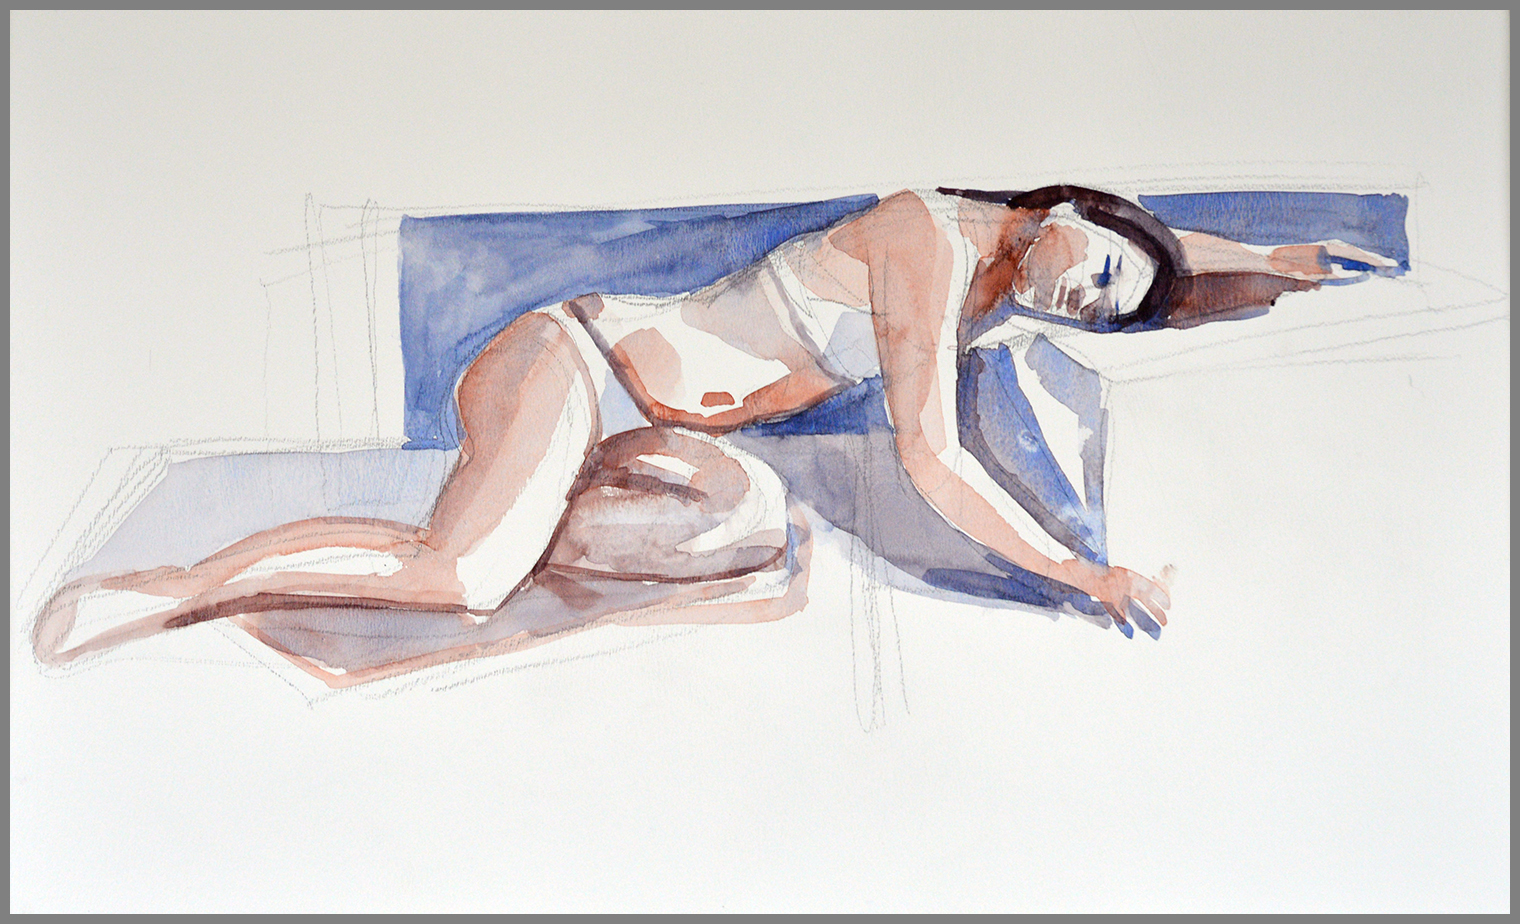  Reclining Figure, wash, 15 x 22 inches 